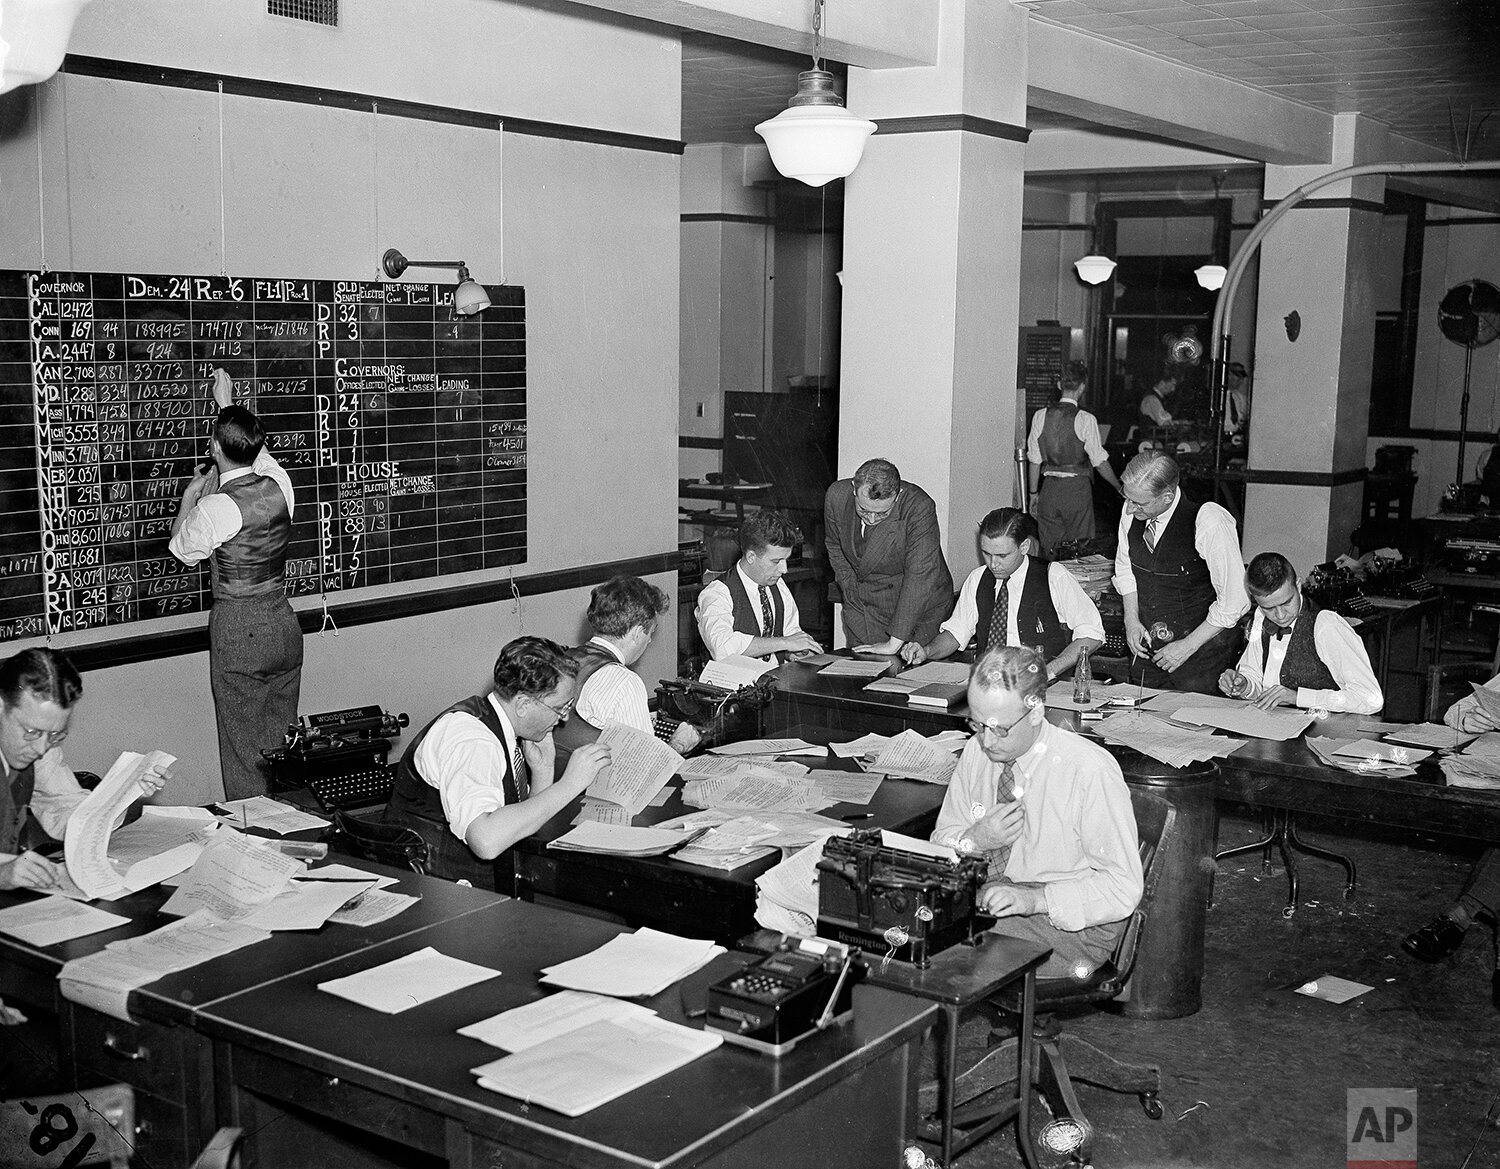  Journalists work on election night in Washington, D.C., Nov. 8, 1938. In background hunched over a writer is Milo Thompson, Washington chief of bureau, who directed the operation. (AP Photo) 